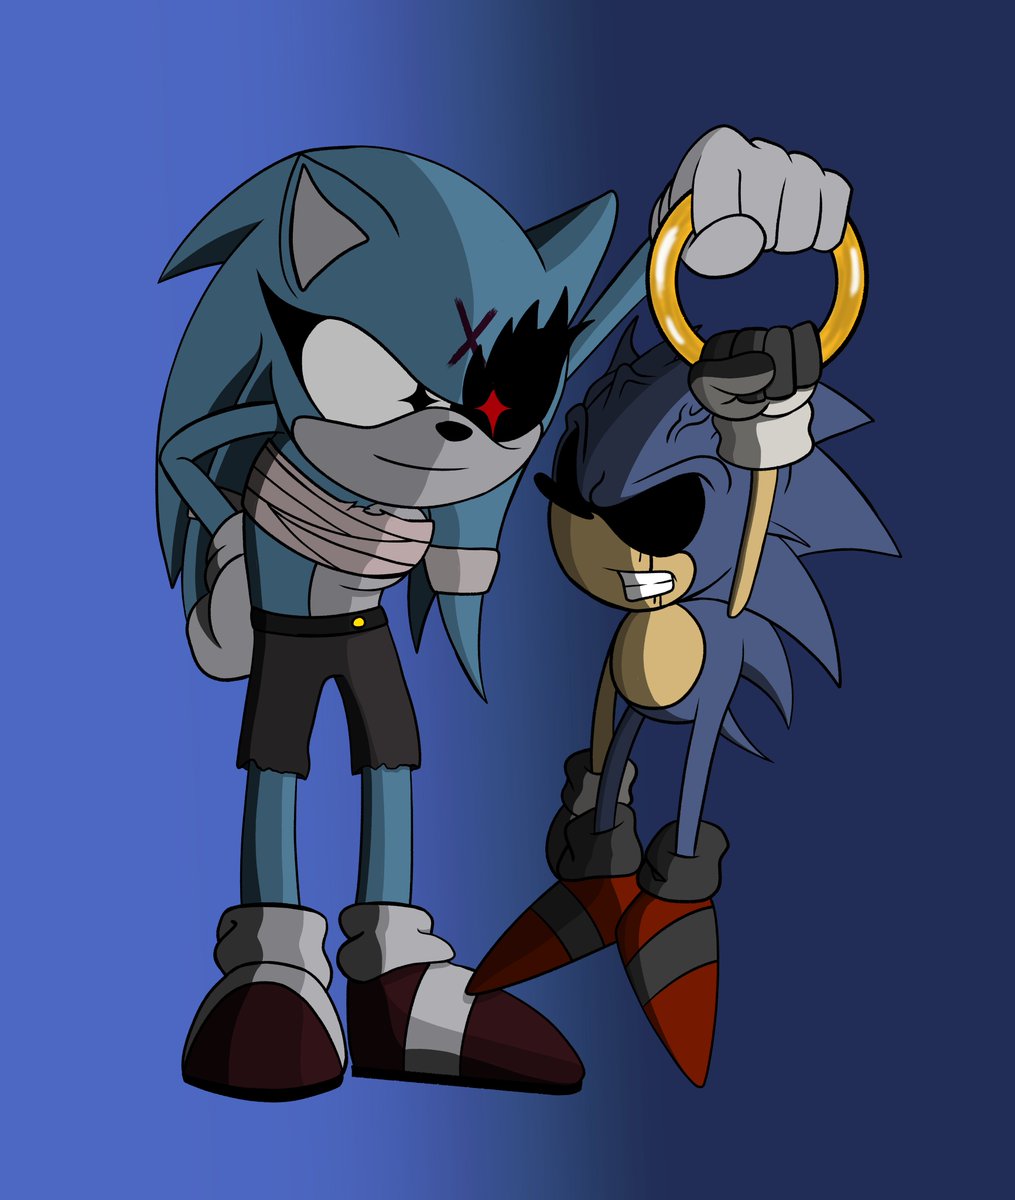 finally got around to drawing a friend's exe, this is my good friend's (@Project_Suki ) exe, PAINexe and, of course, Cindered Sonic. I thought this pose was funny and really how small Cinder is, well, until his mutated form... #exeoc #CinderedSonic #PAINexe